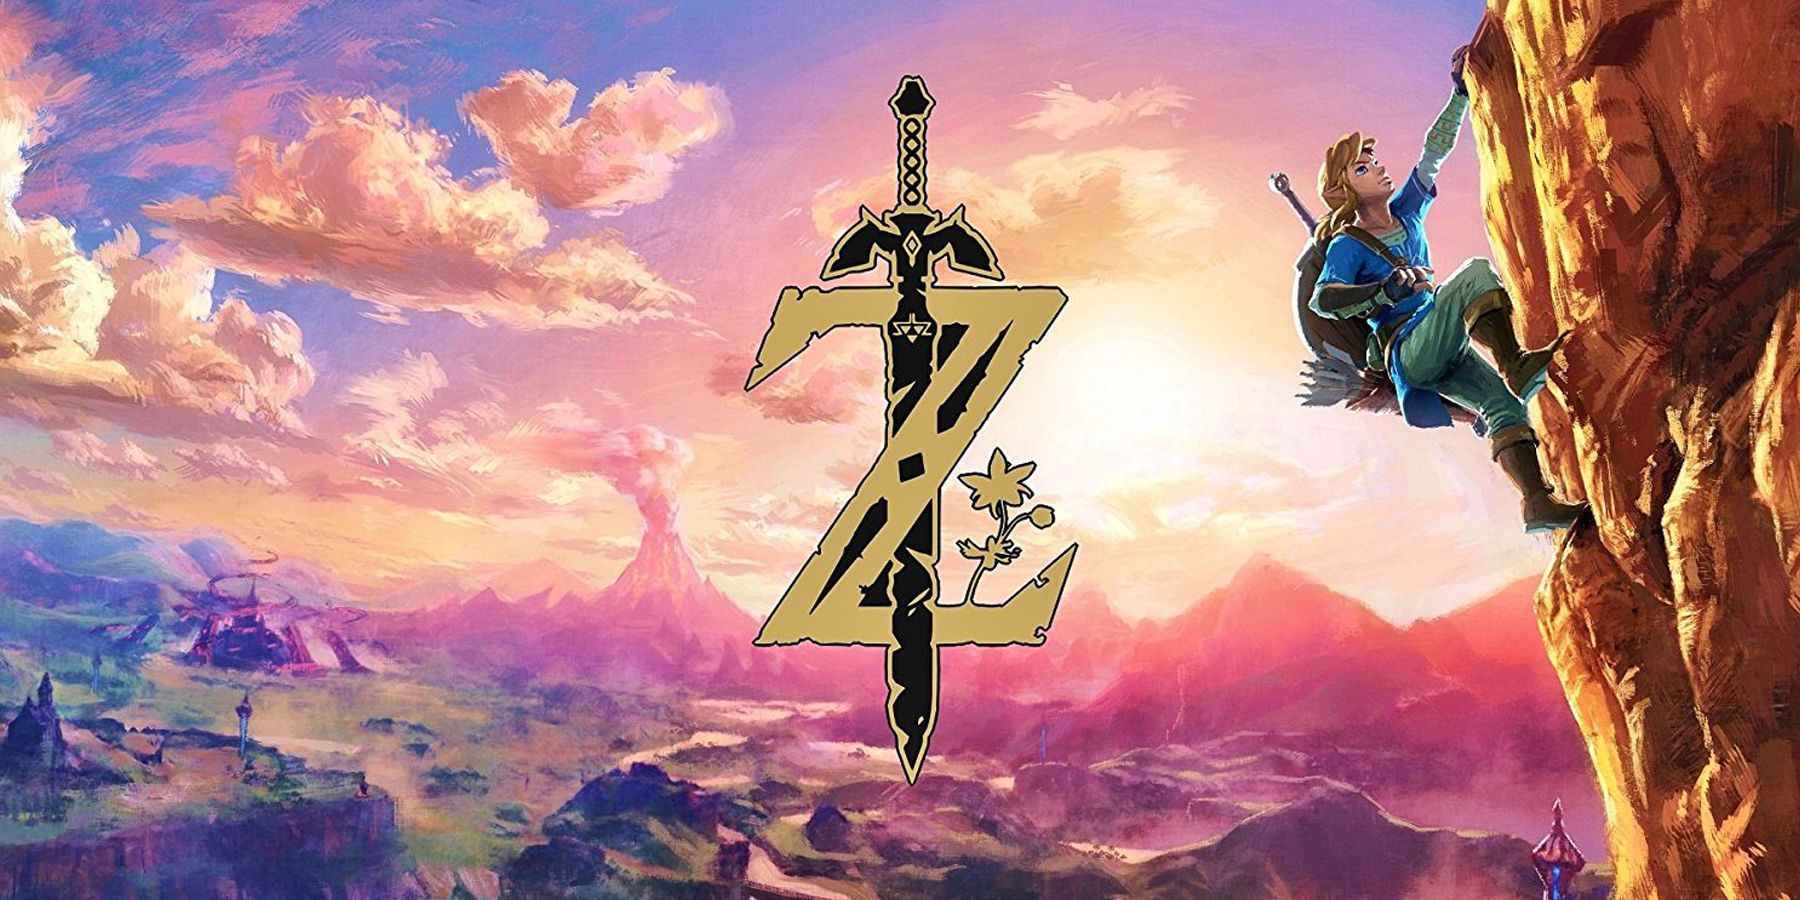 The Z logo with the Master Sword from the Legend of Zelda series with Link climbing a cliff in the images peripheral.